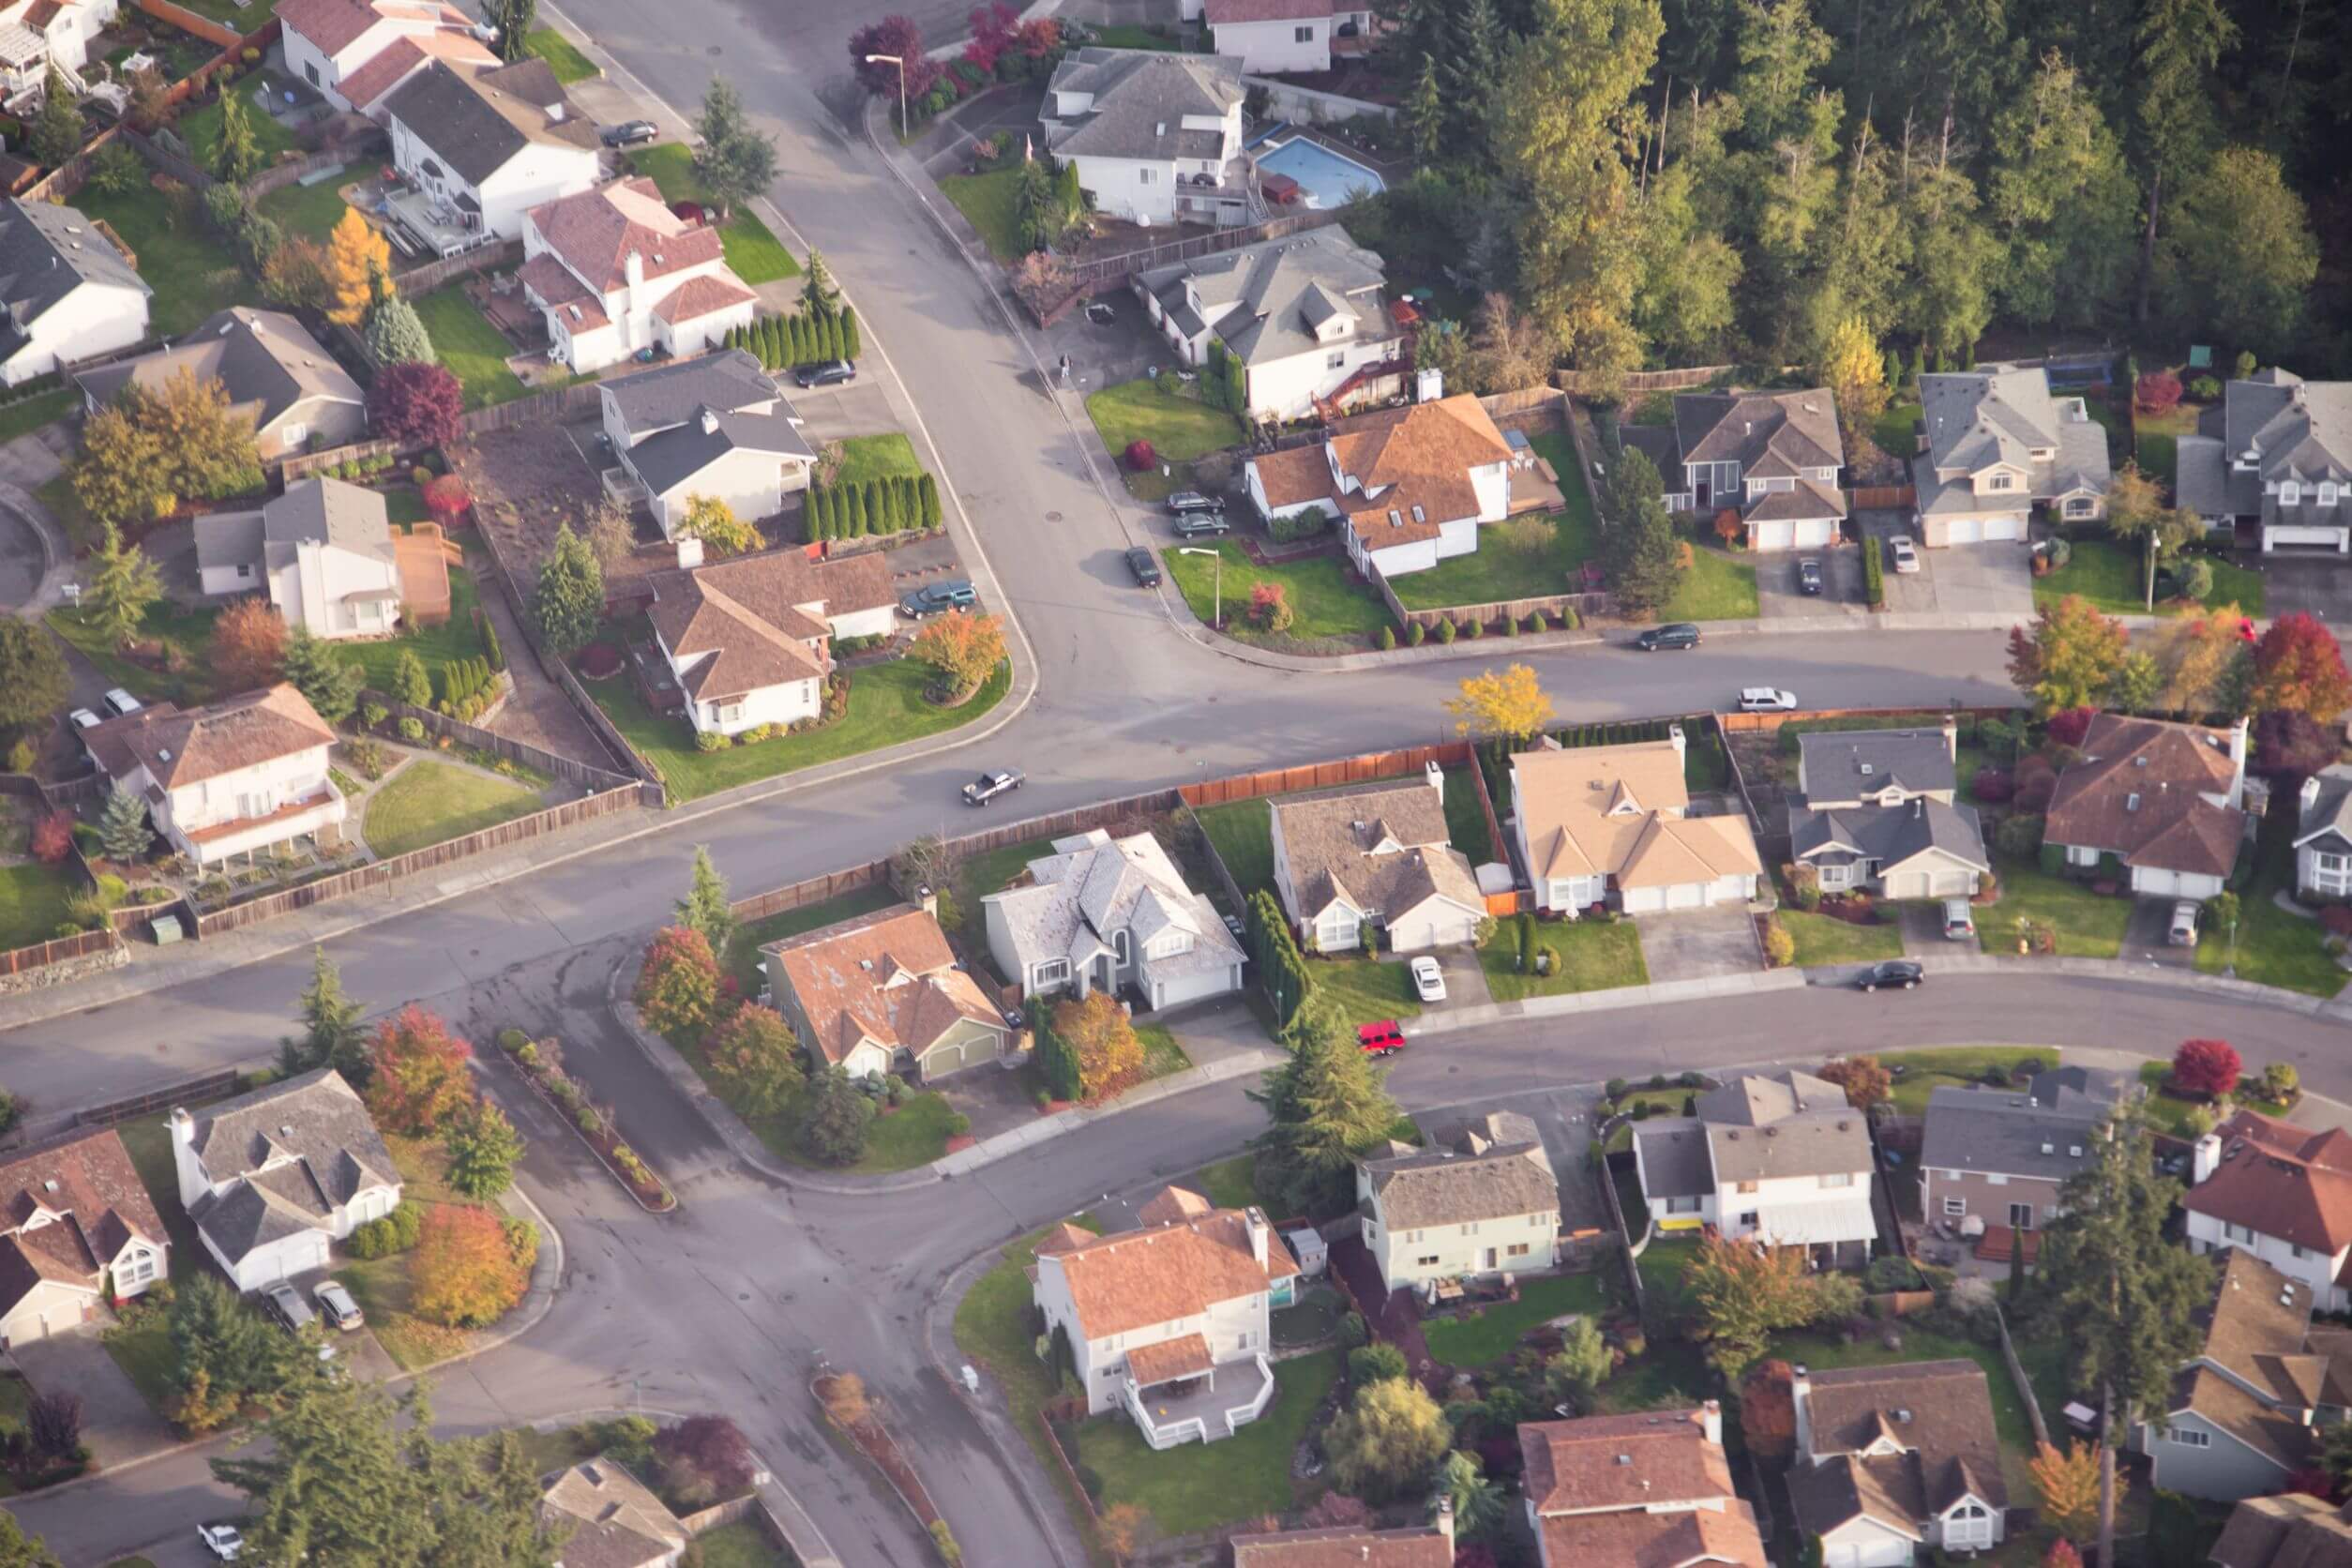 11268329-aerial-view-of-single-car-driving-on-a-neighborhood-road